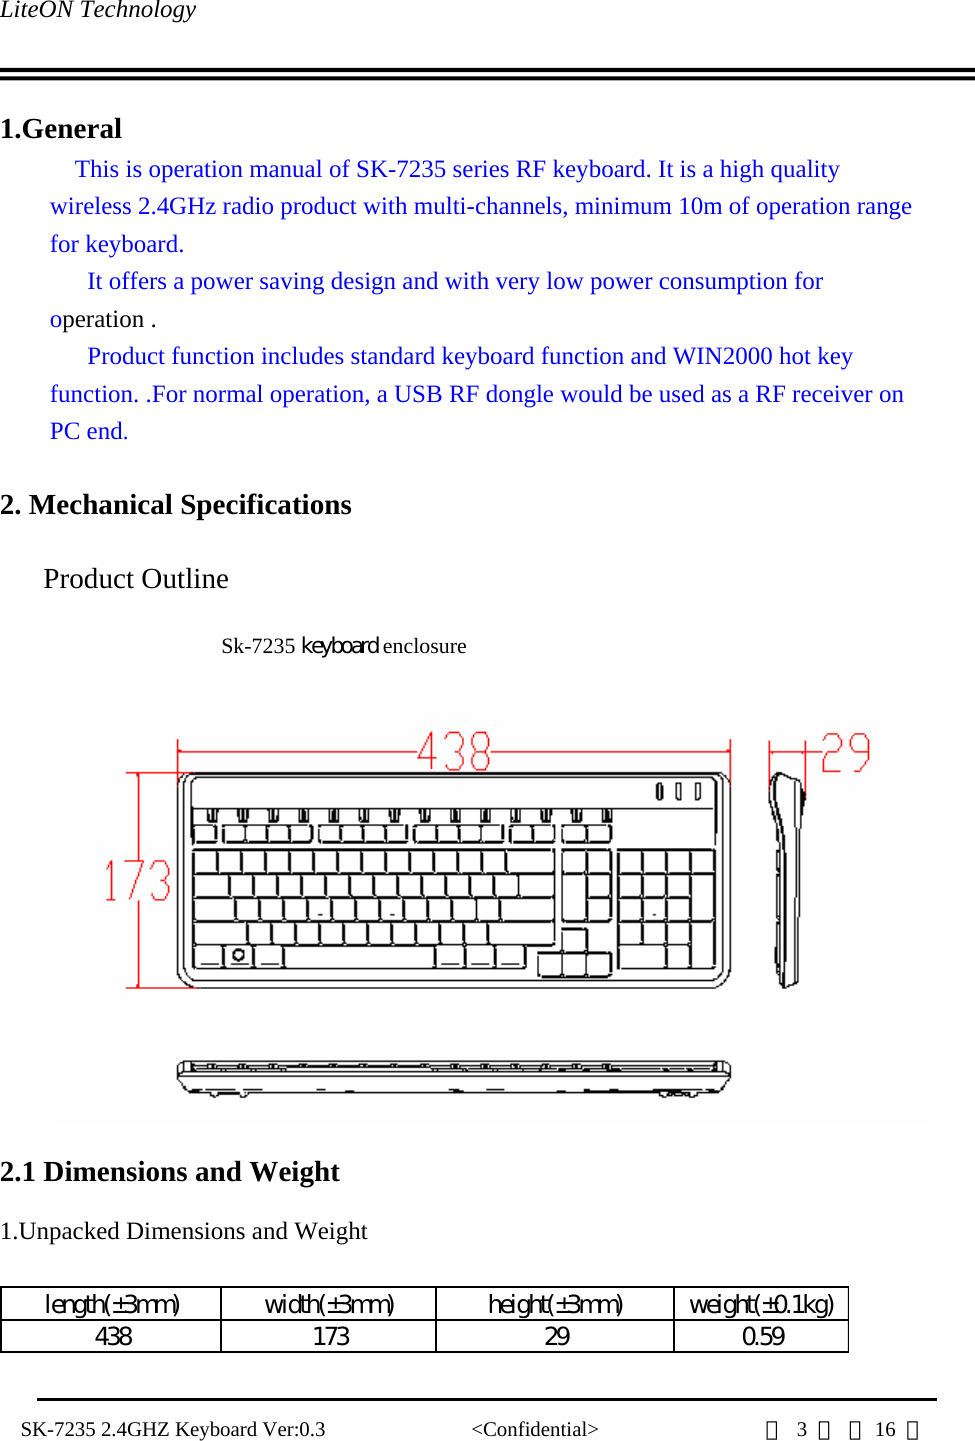 LiteON Technology                                                                                   SK-7235 2.4GHZ Keyboard Ver:0.3              &lt;Confidential&gt;                第 3 頁 共16  頁                 1.General This is operation manual of SK-7235 series RF keyboard. It is a high quality wireless 2.4GHz radio product with multi-channels, minimum 10m of operation range for keyboard.   It offers a power saving design and with very low power consumption for operation . Product function includes standard keyboard function and WIN2000 hot key function. .For normal operation, a USB RF dongle would be used as a RF receiver on PC end.   2. Mechanical Specifications   Product Outline  Sk-7235 keyboard enclosure      2.1 Dimensions and Weight      1.Unpacked Dimensions and Weight    length(±3mm) width(±3mm) height(±3mm) weight(±0.1kg)438 173 29 0.59   